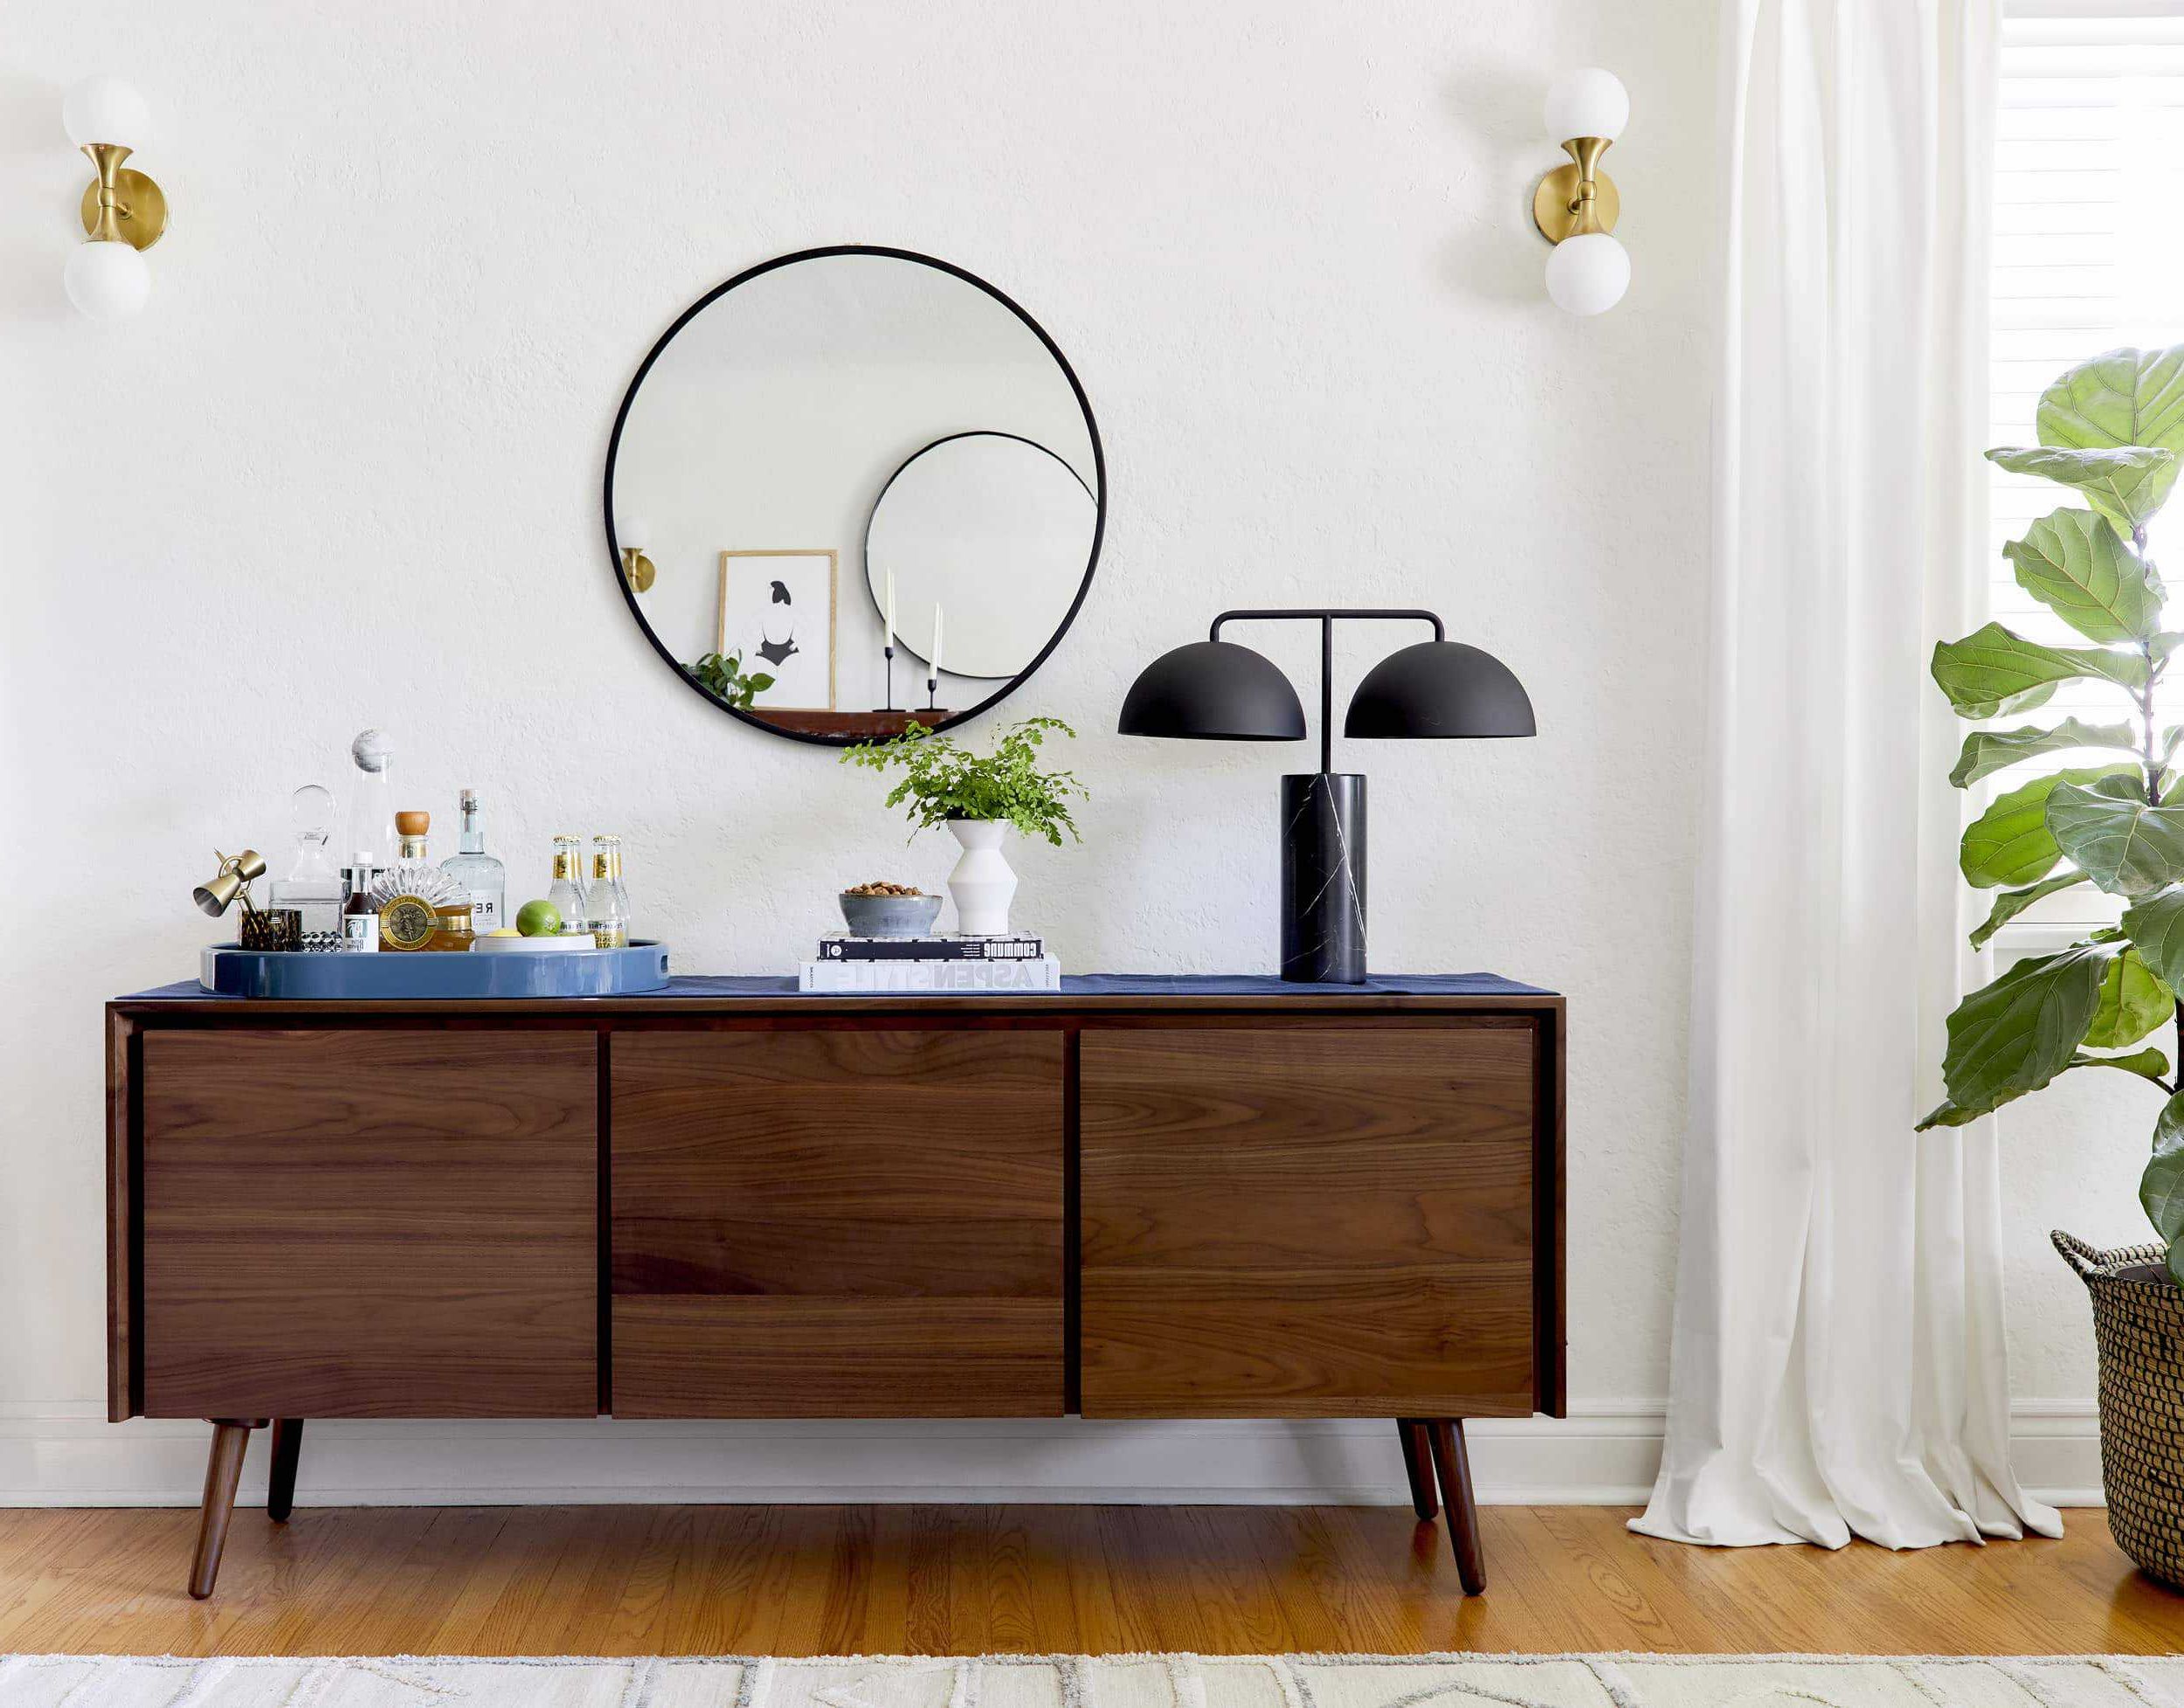 Credenzas For Living Room Pertaining To 2017 4 Ways To Style That Credenza For "real Life" + Shop Our Favorite Credenzas  – Emily Henderson (View 9 of 10)